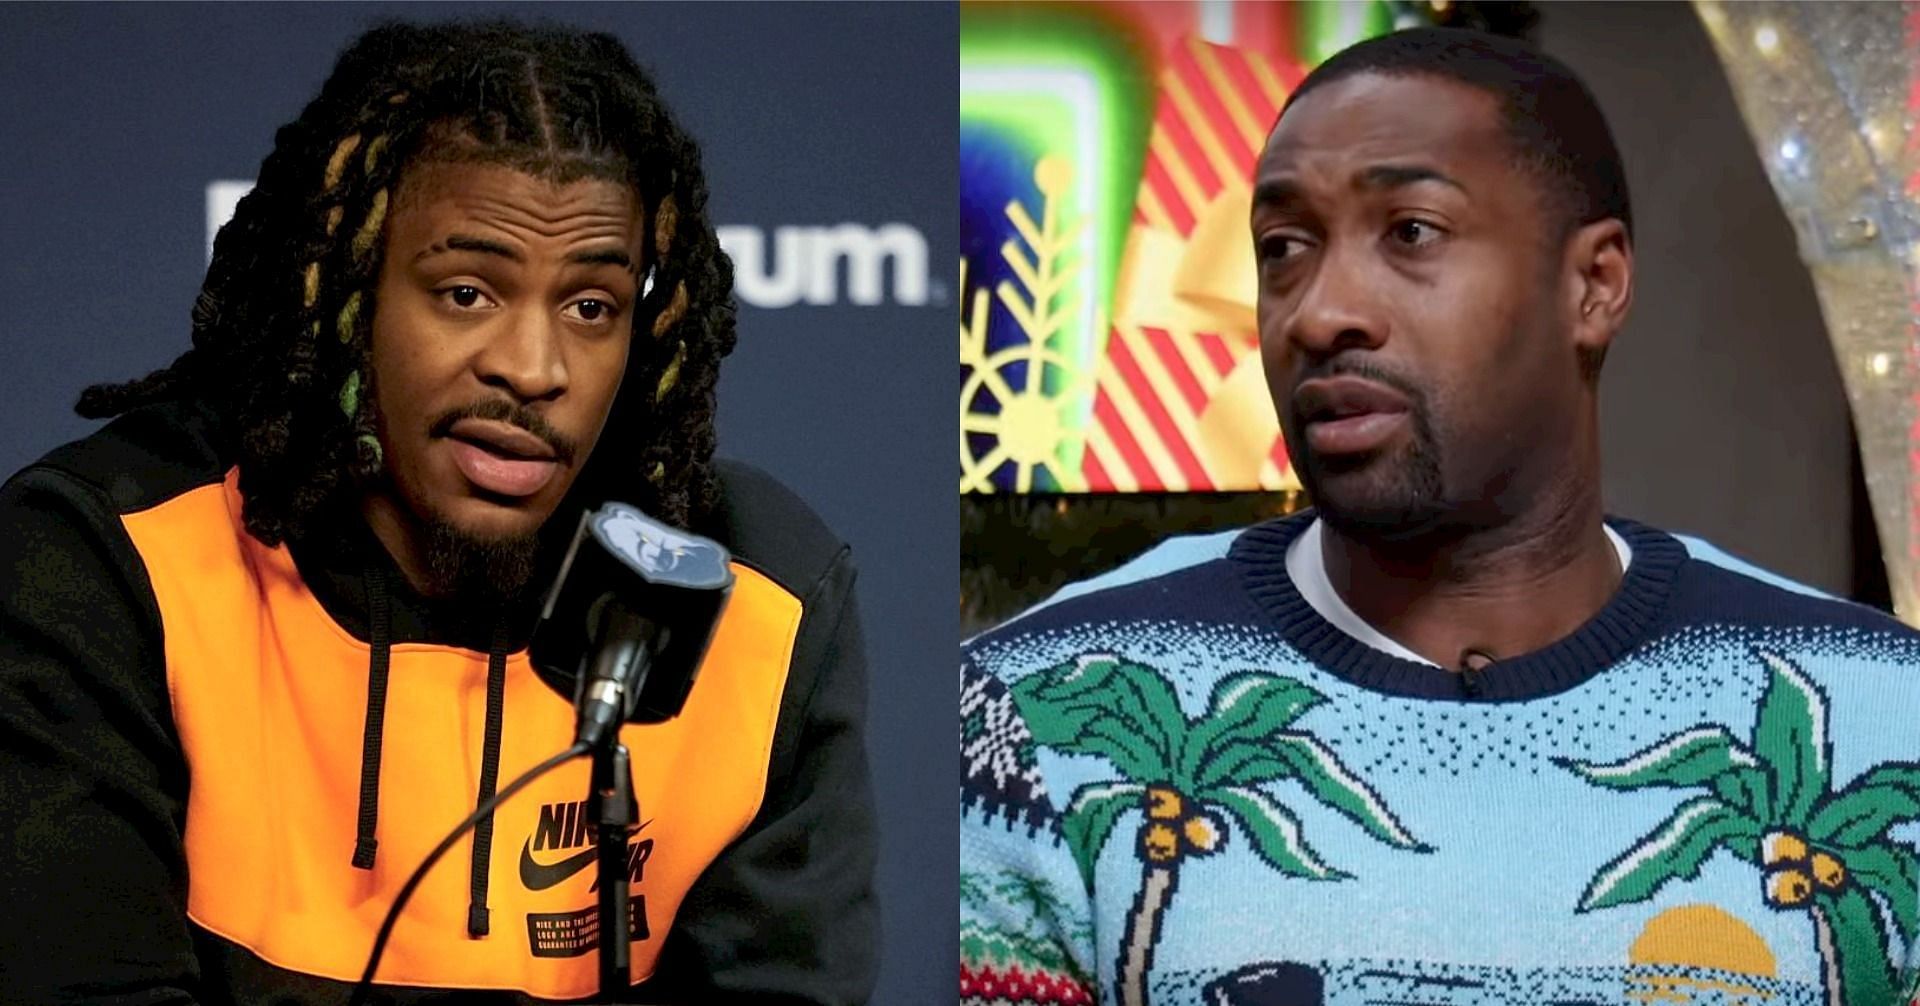 Memphis Grizzlies star point guard Ja Morant and former three-time All-Star Gilbert Arenas